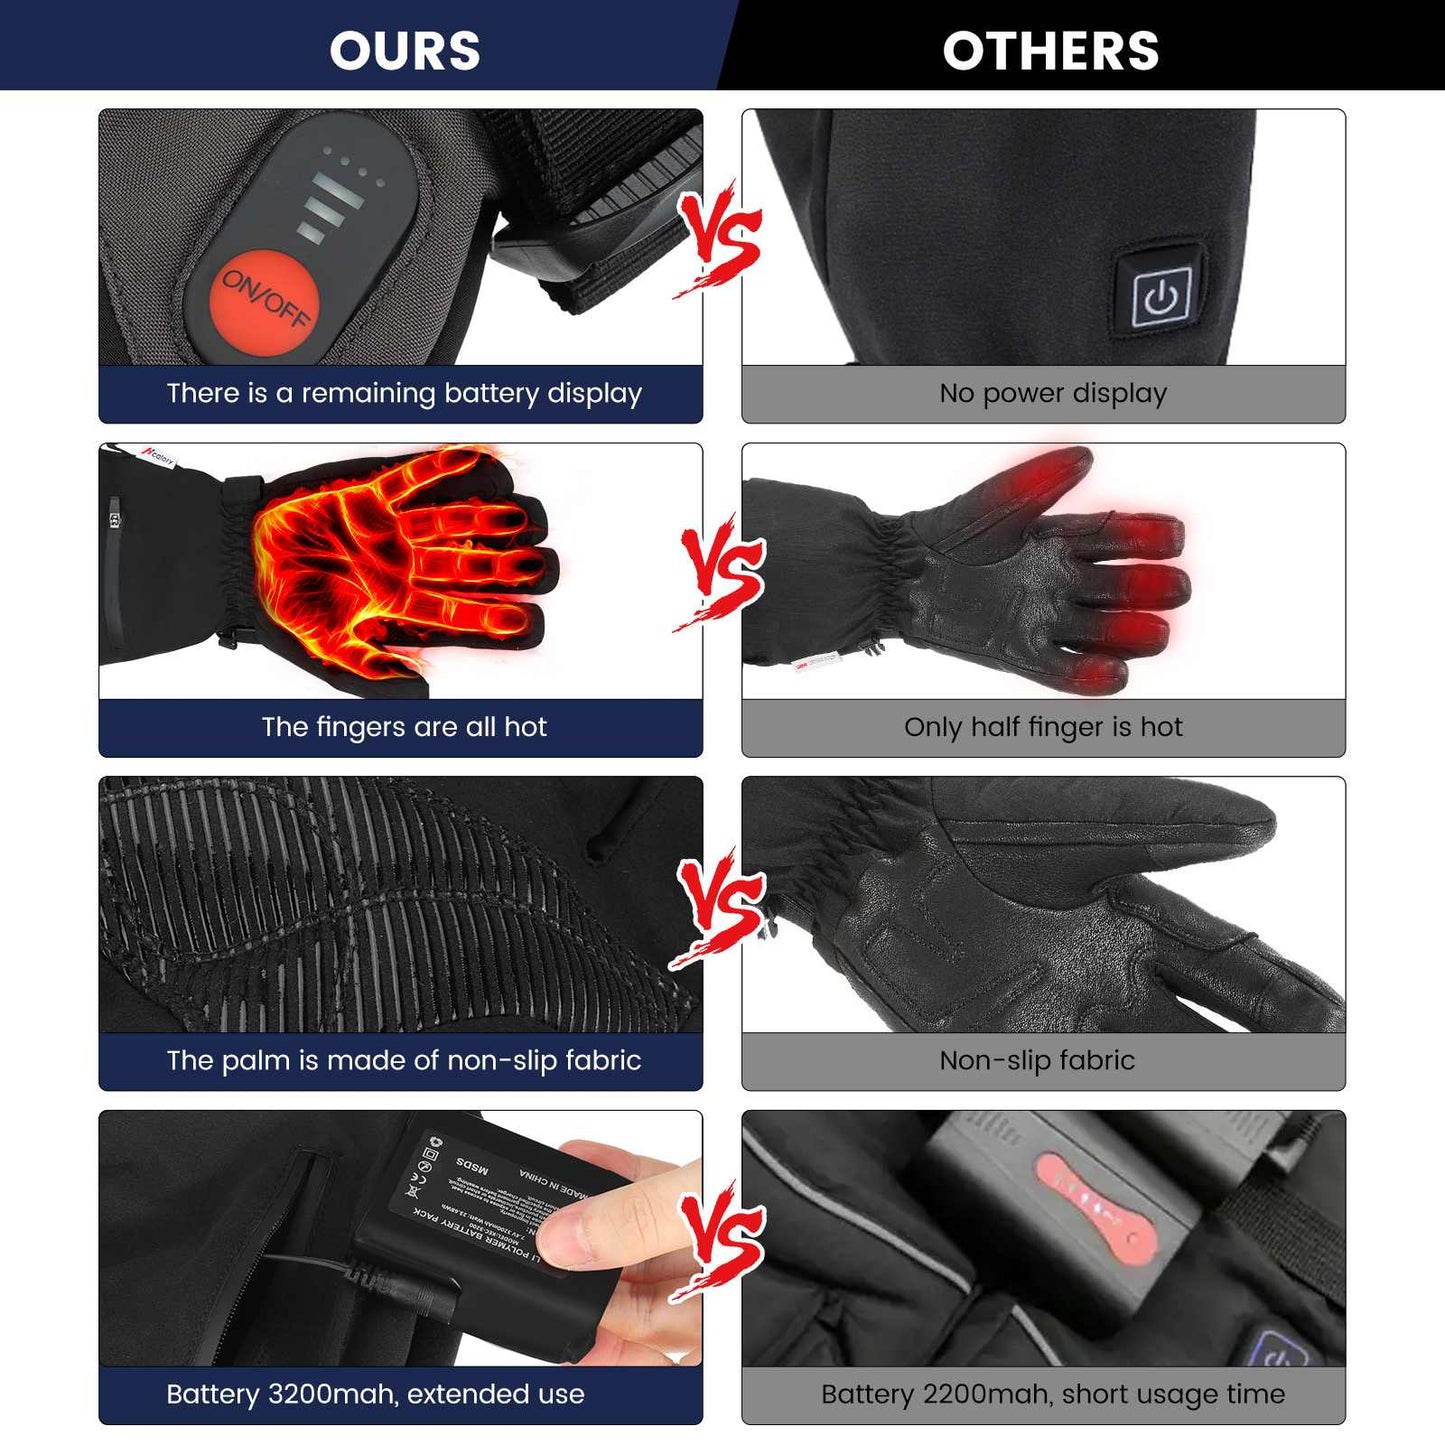 Hcalory Heated Motorcycle Gloves EU Plug Winter Moto Heated Gloves Waterproof Rechargeable Heating Thermal Gloves For Snowmobile - youronestopstore23